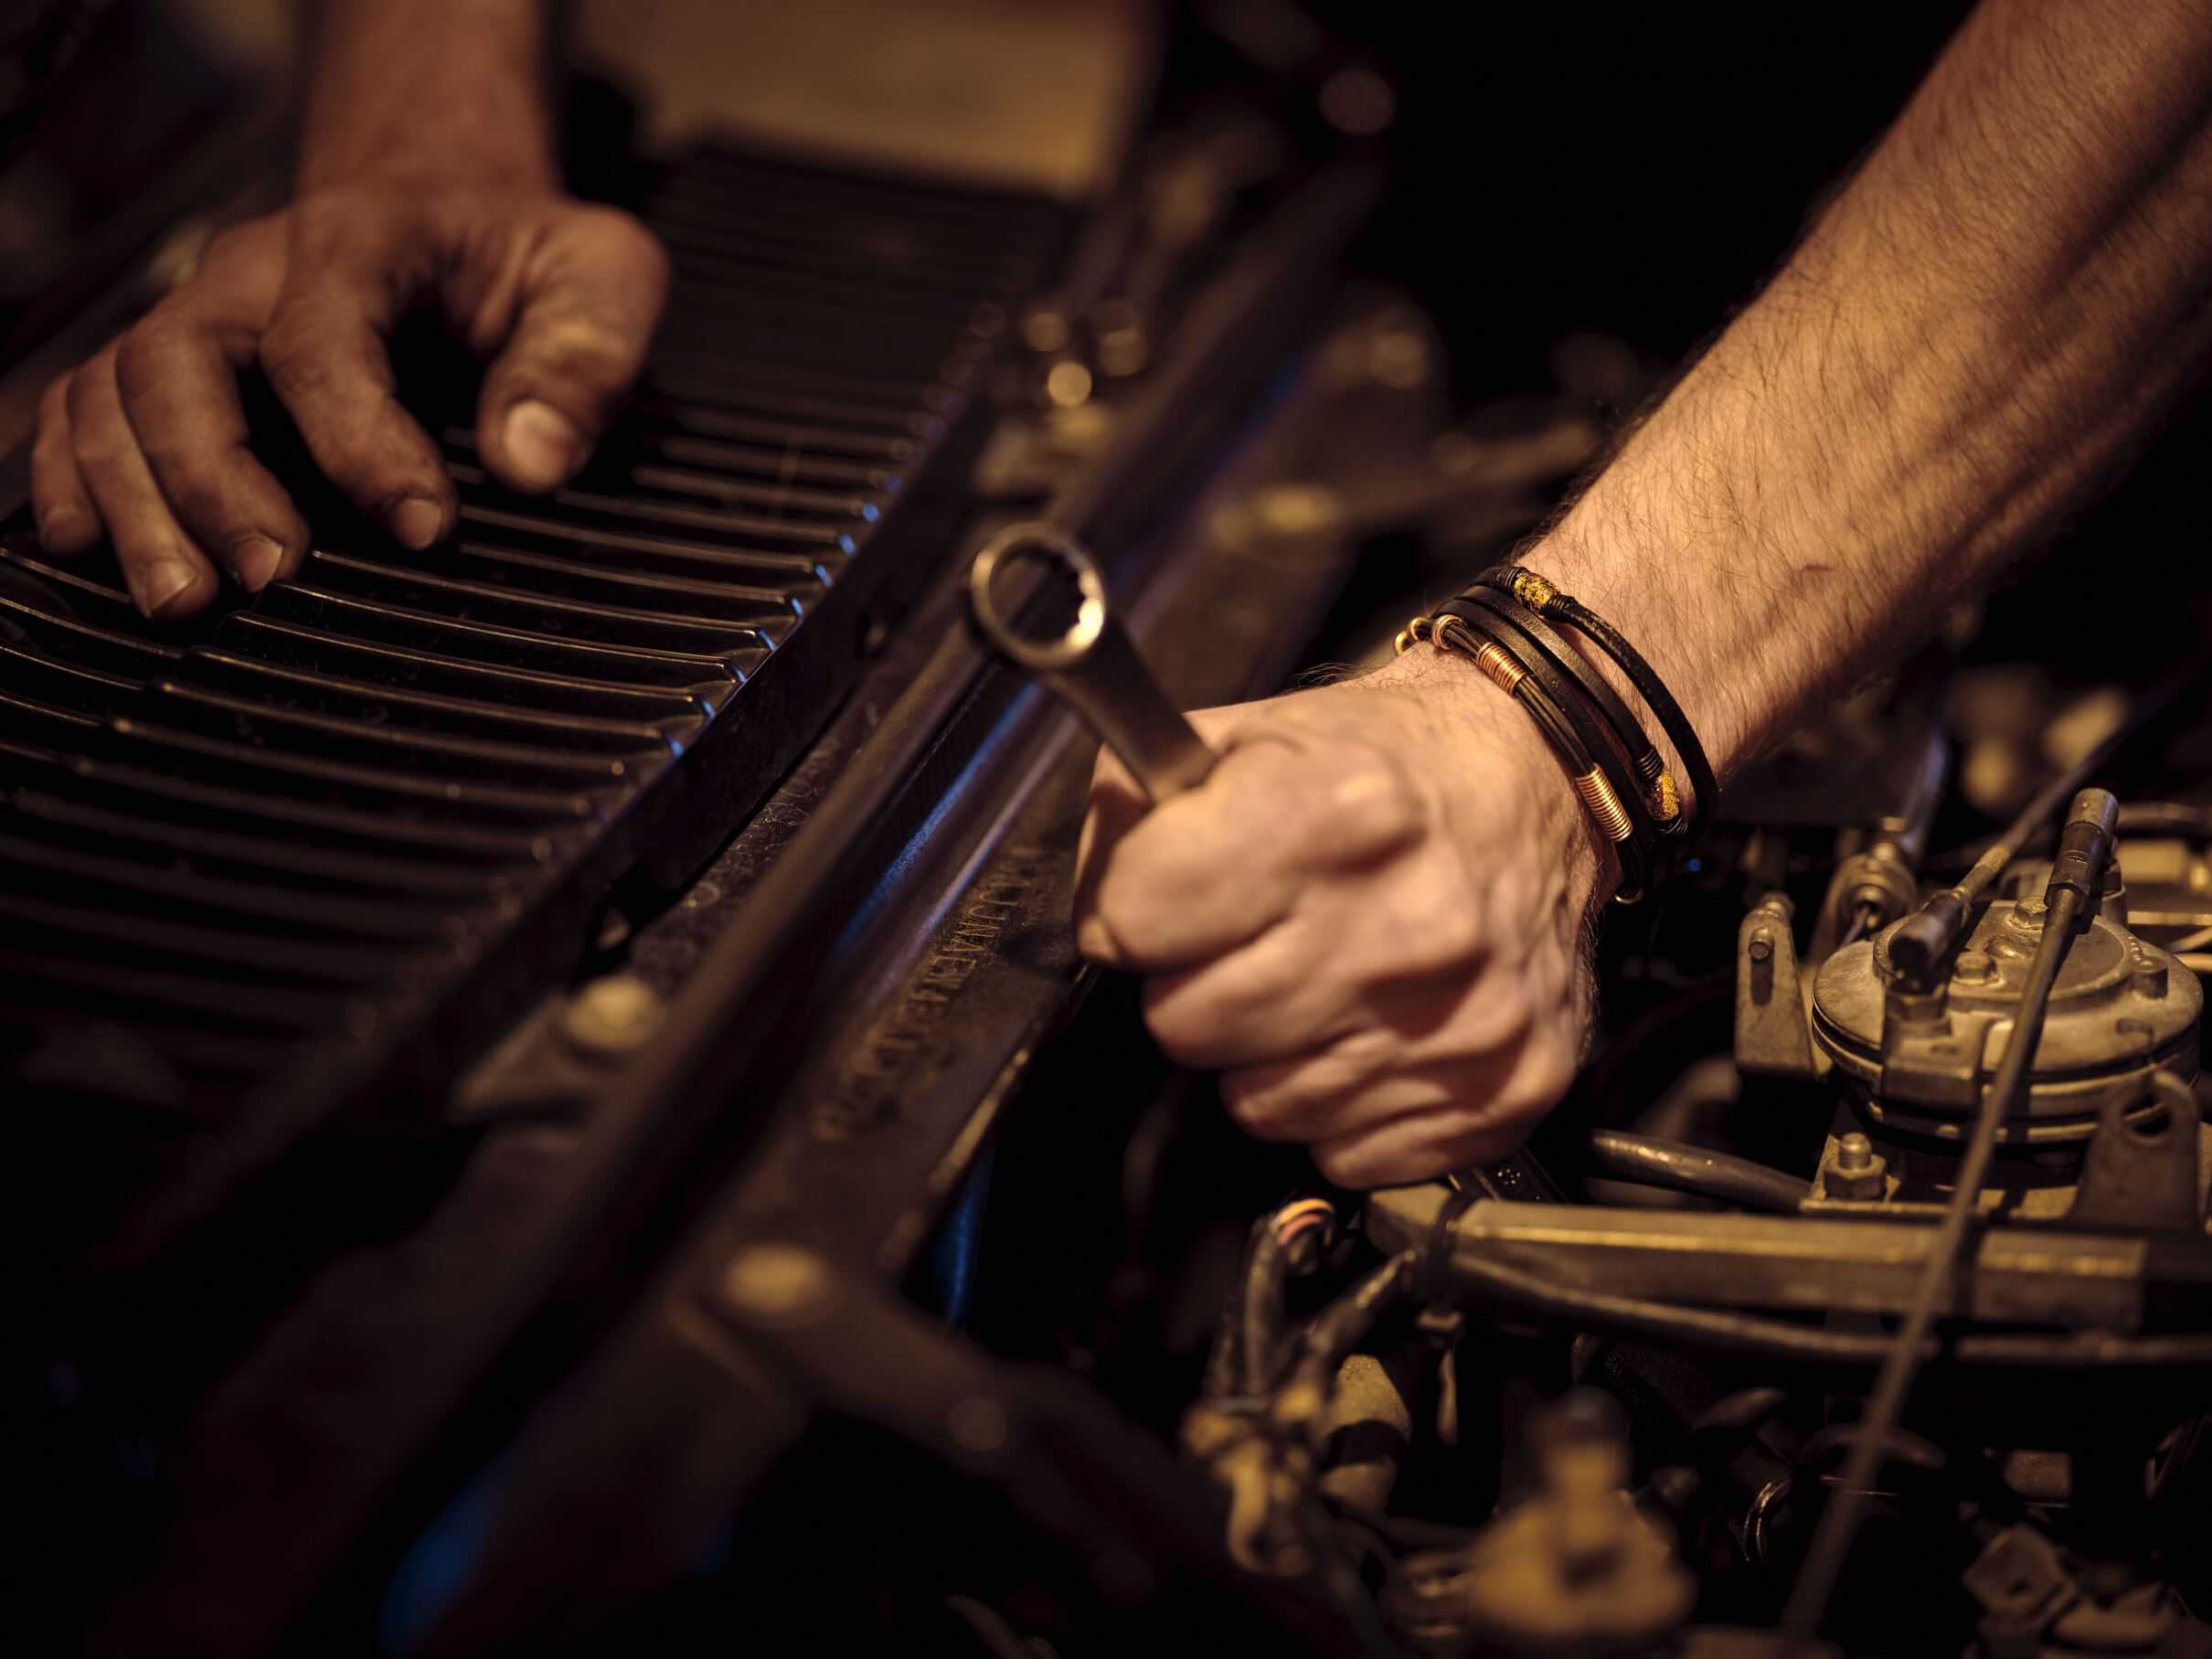 Professional vehicle mechanic working under the hood of a car